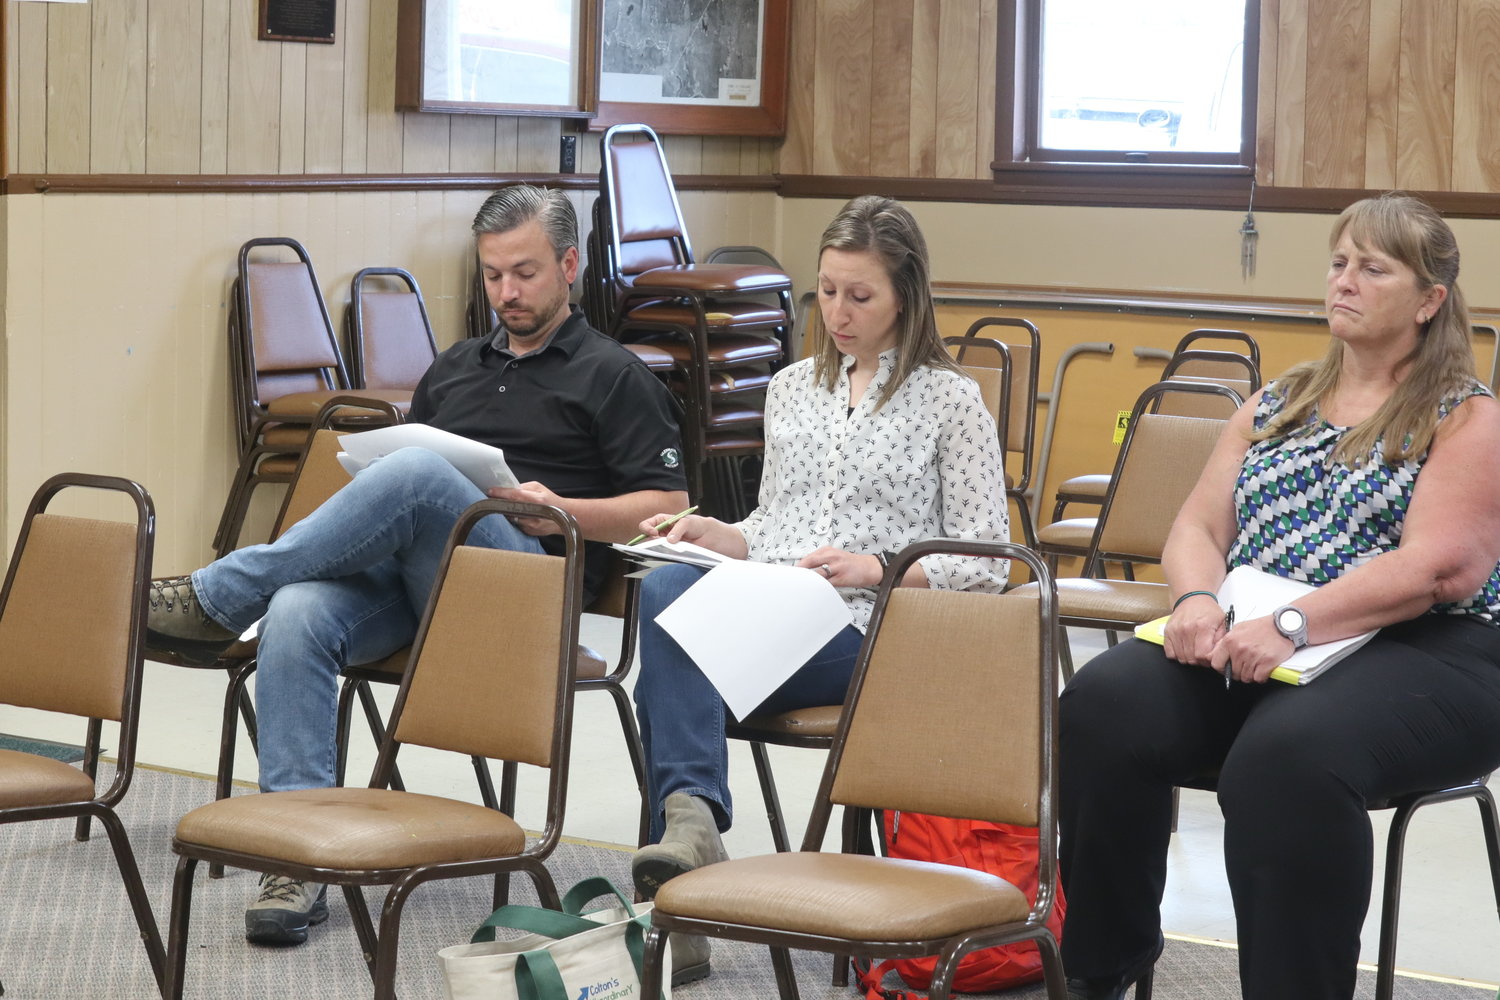 Rocco Baldassari, left, general manager of Kittatinny-Northgate Resorts, Mary Campbell, project manager for Northgate Resorts and Jody Allen of LaBella Associates listen to the proposed expansion and rebranding project of Kittatinny Campgrounds as Camp Fimfo-Catskills.